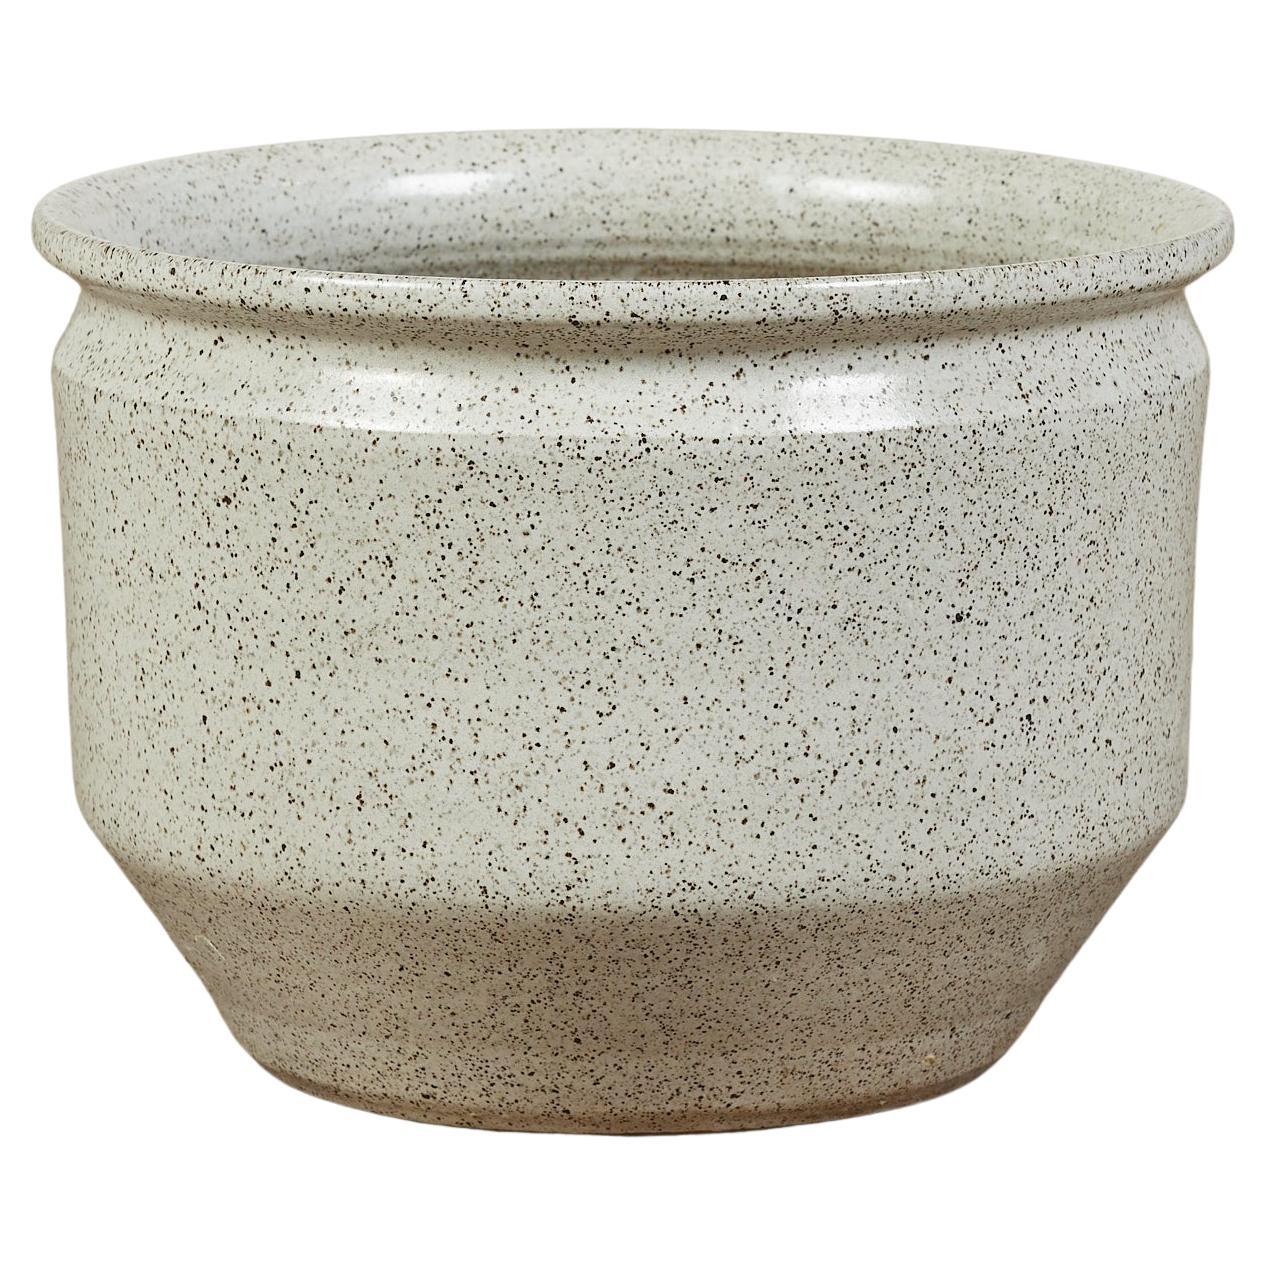 David Cressey Pro / Artisan Planter for Architectural Pottery